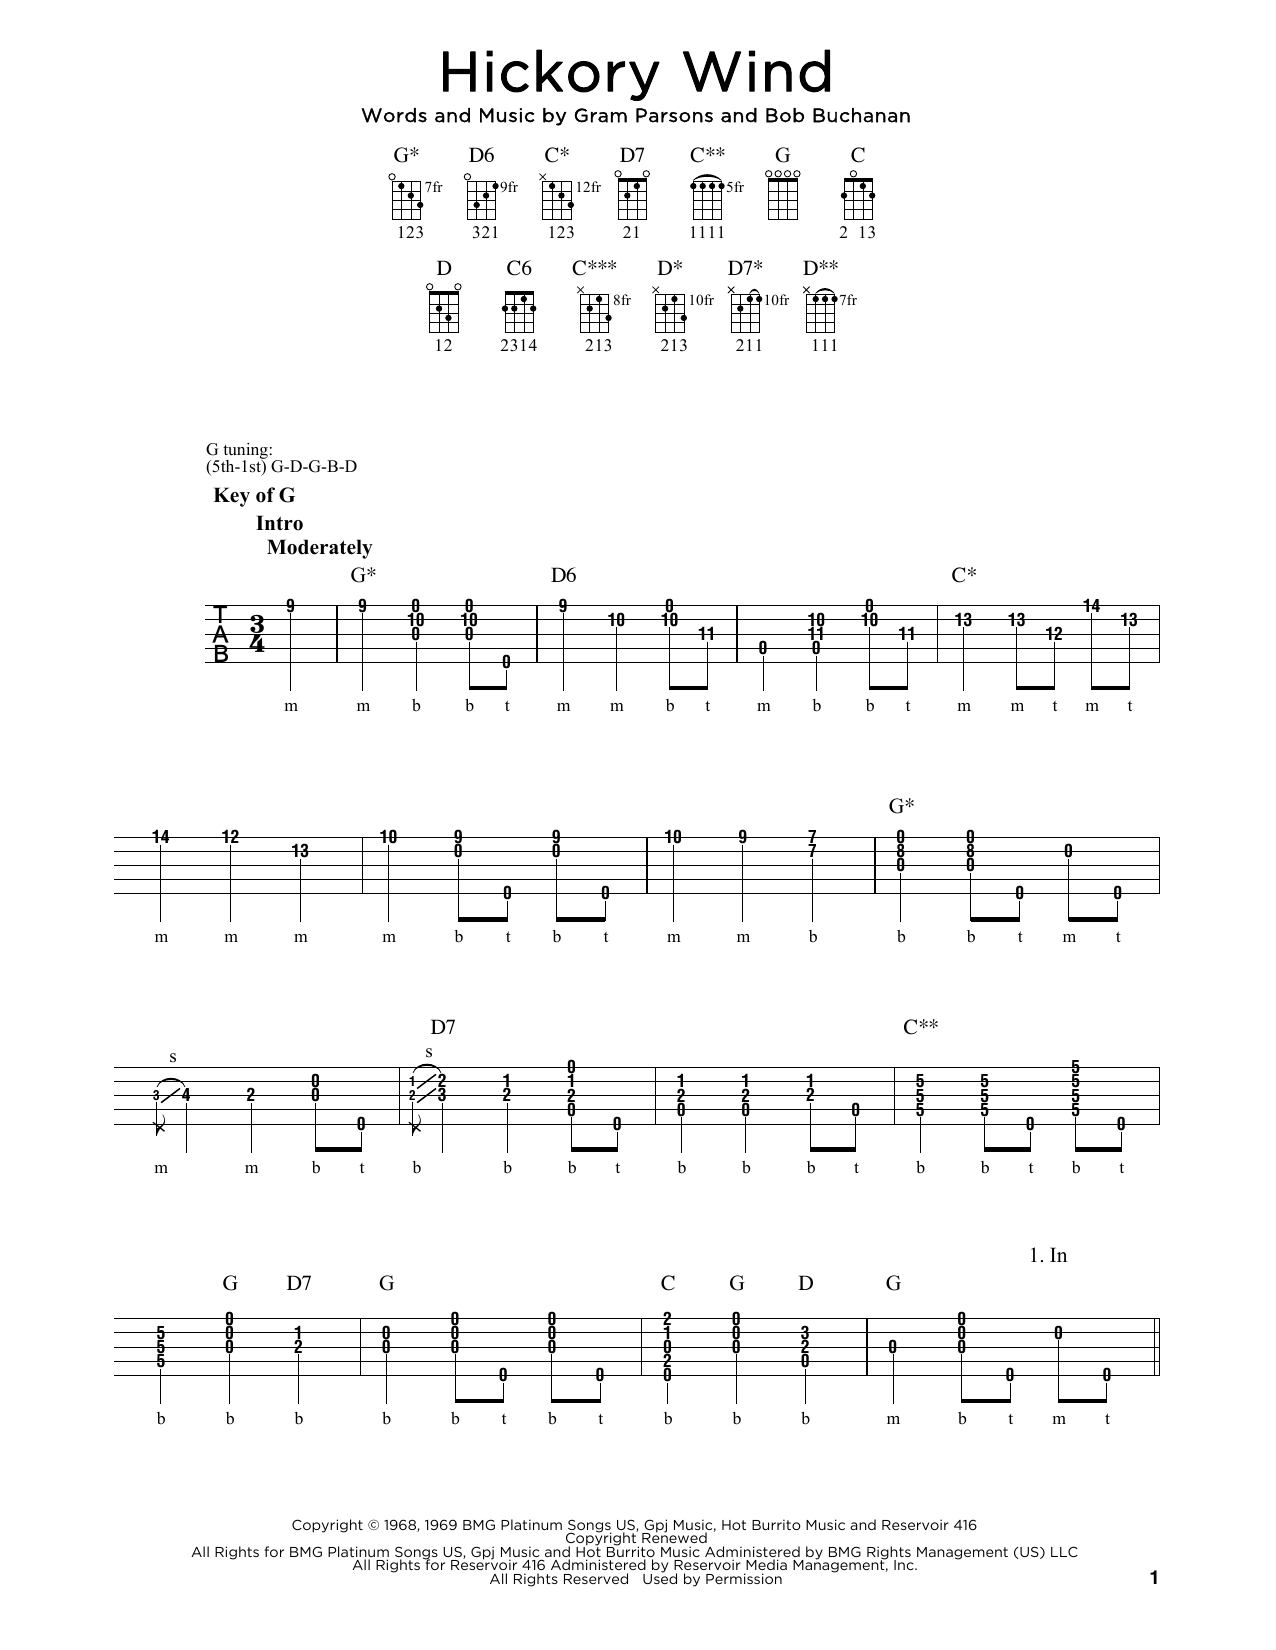 Download Gram Parsons Hickory Wind Sheet Music